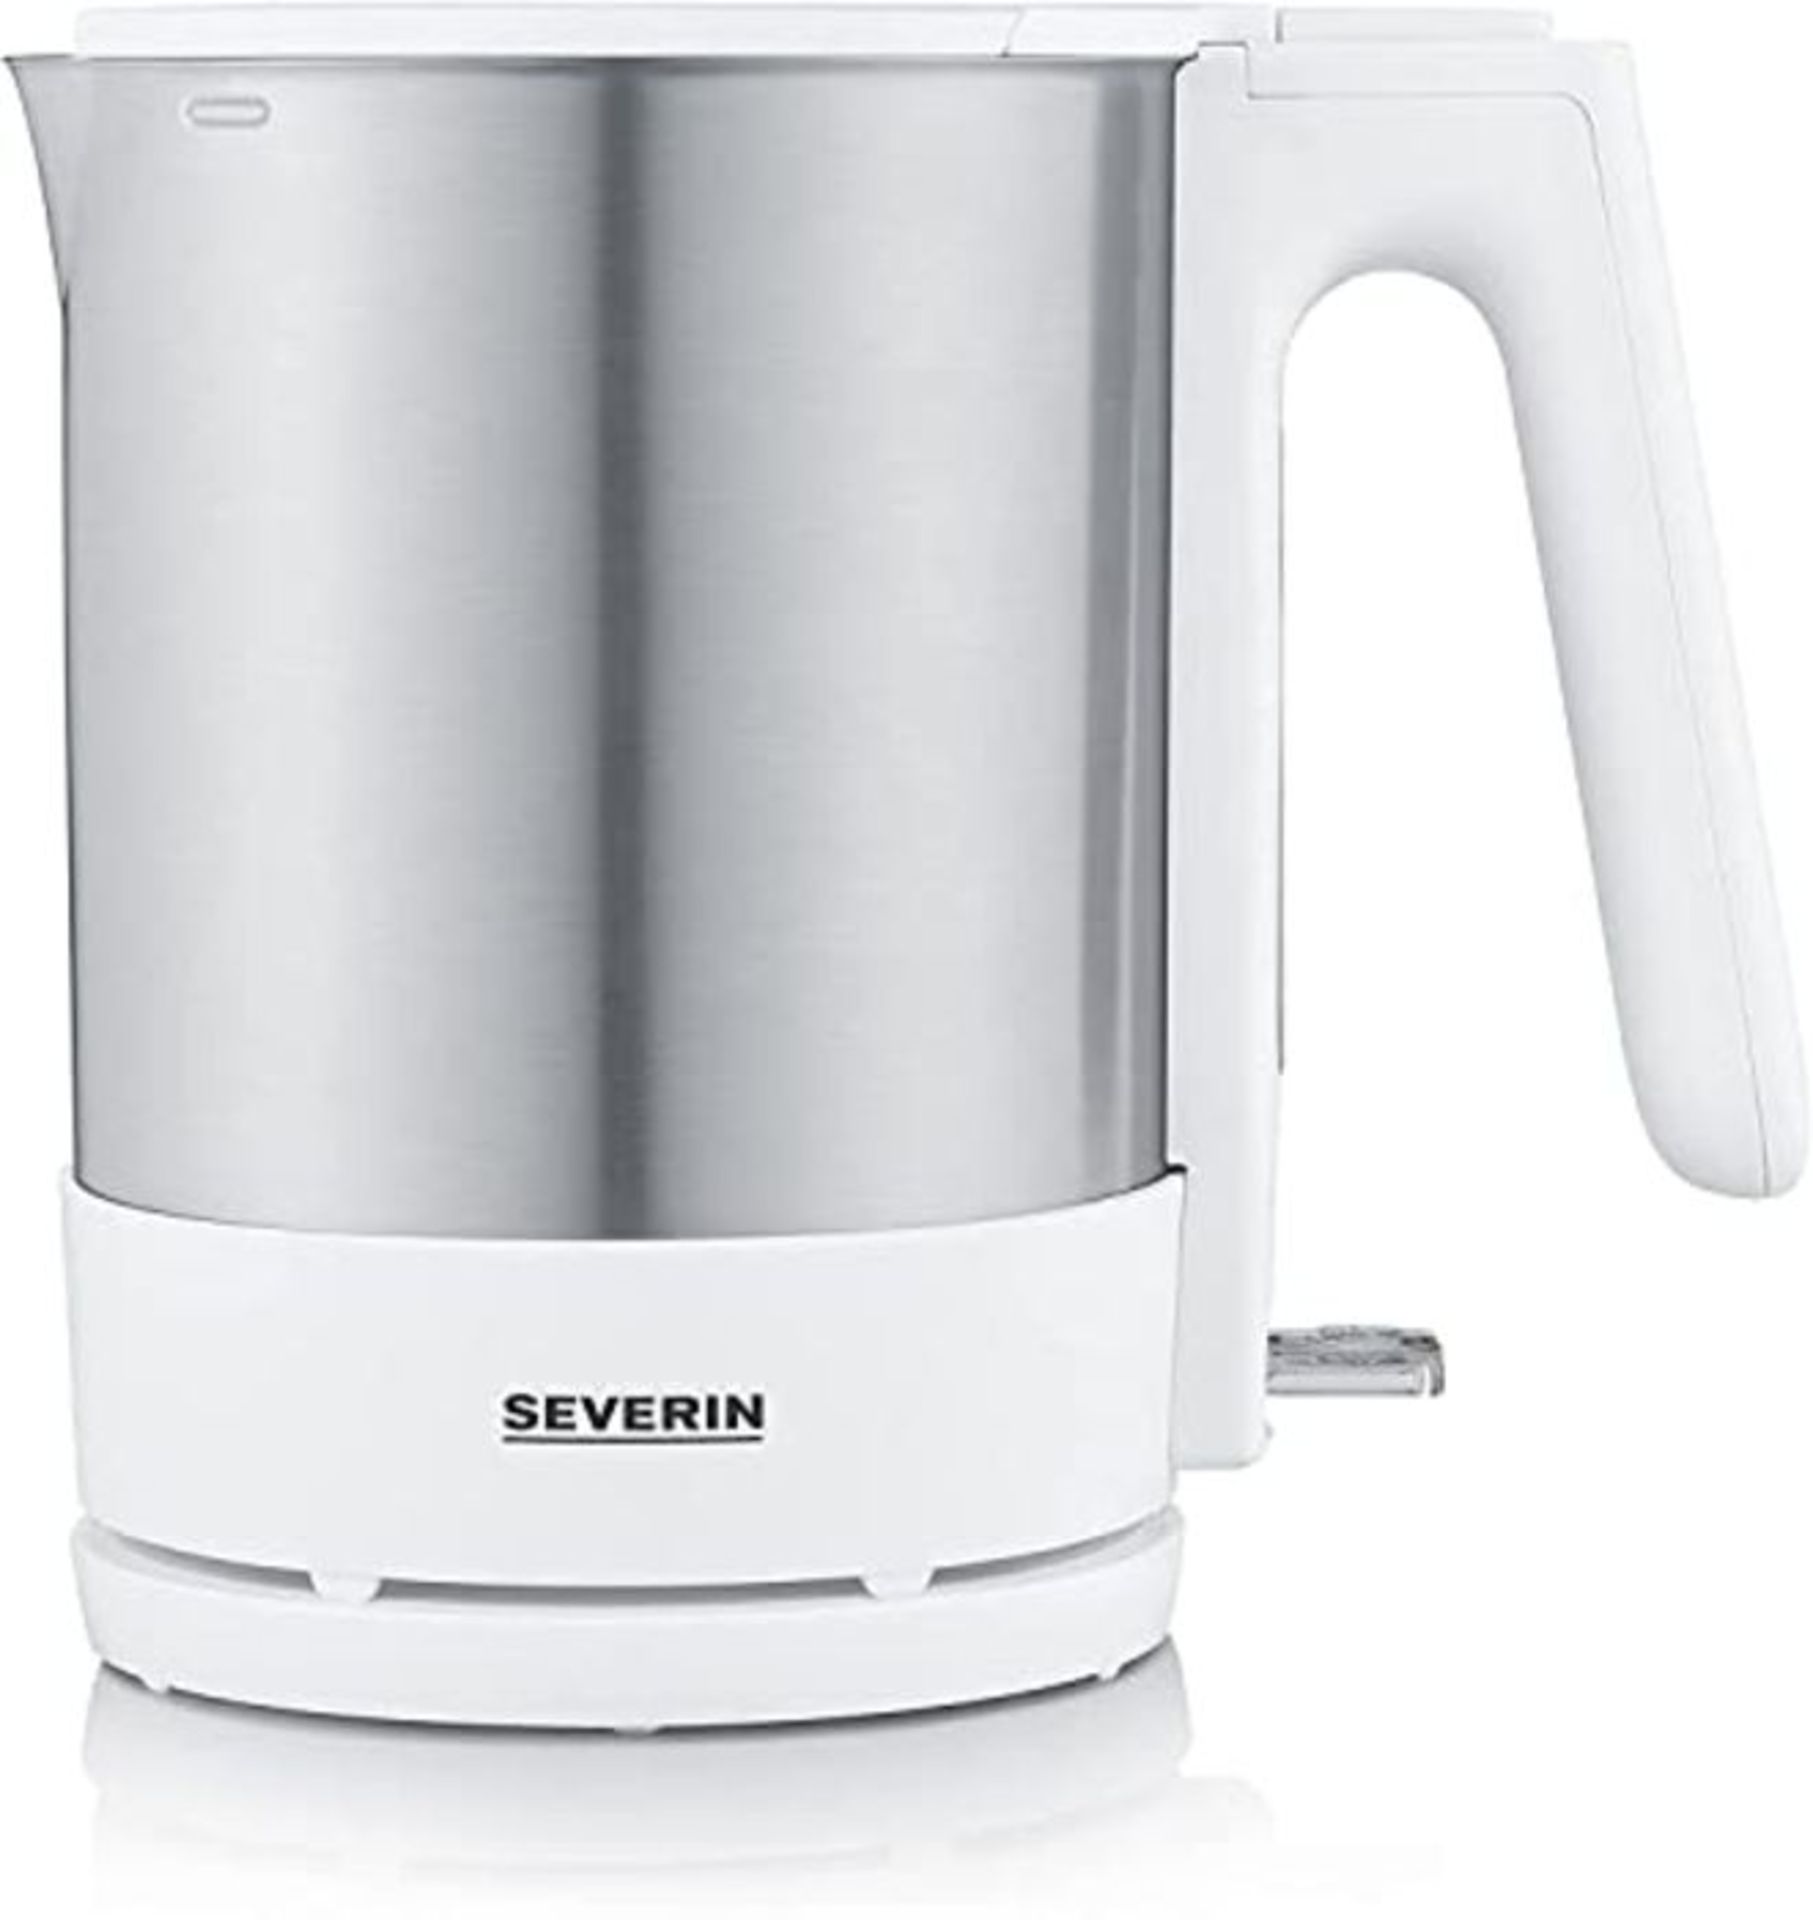 Severin WK 3419 electric kettle 1.7 L Stainless steel,White 2200 W WK 3419, 1.7 L, 220